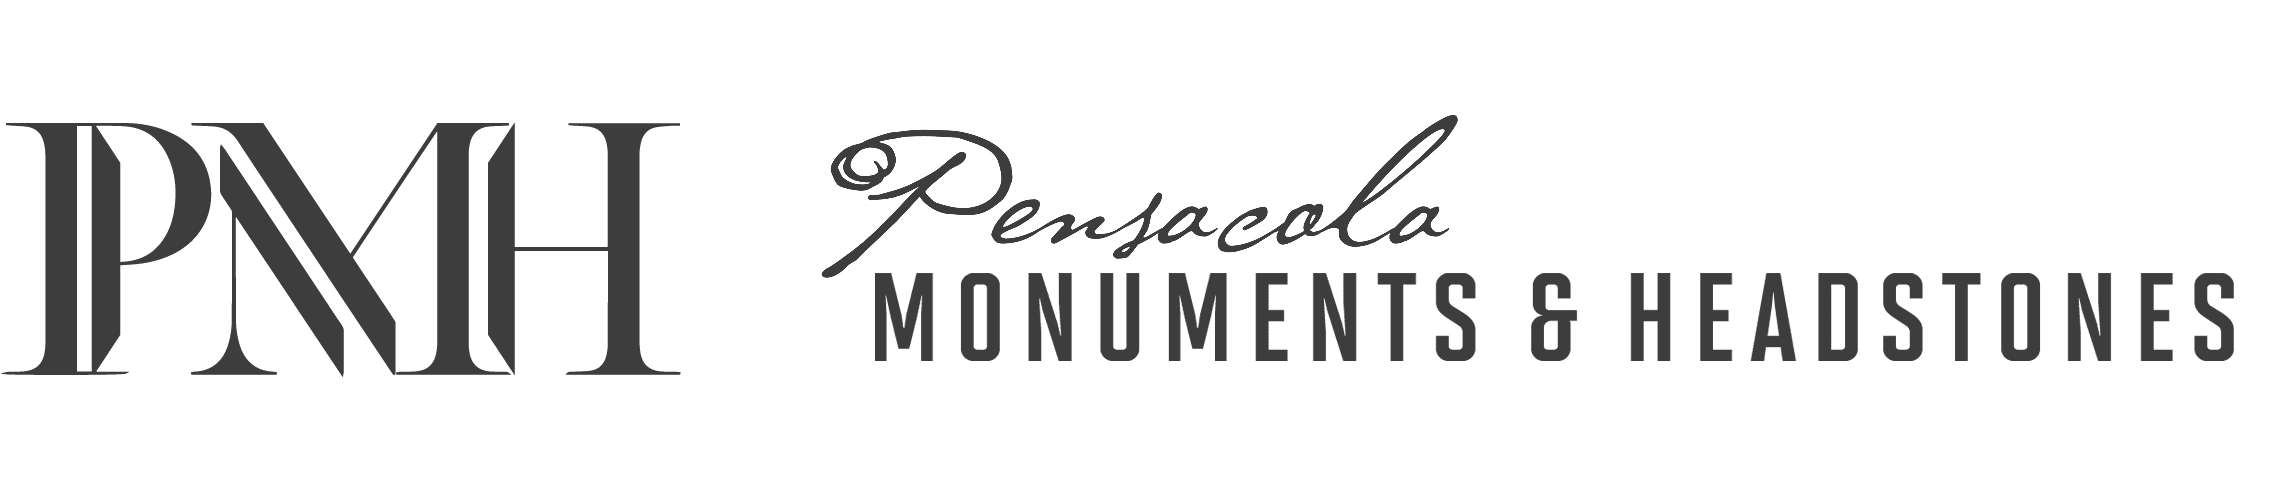 Pensacola Monuments and Headstones - South